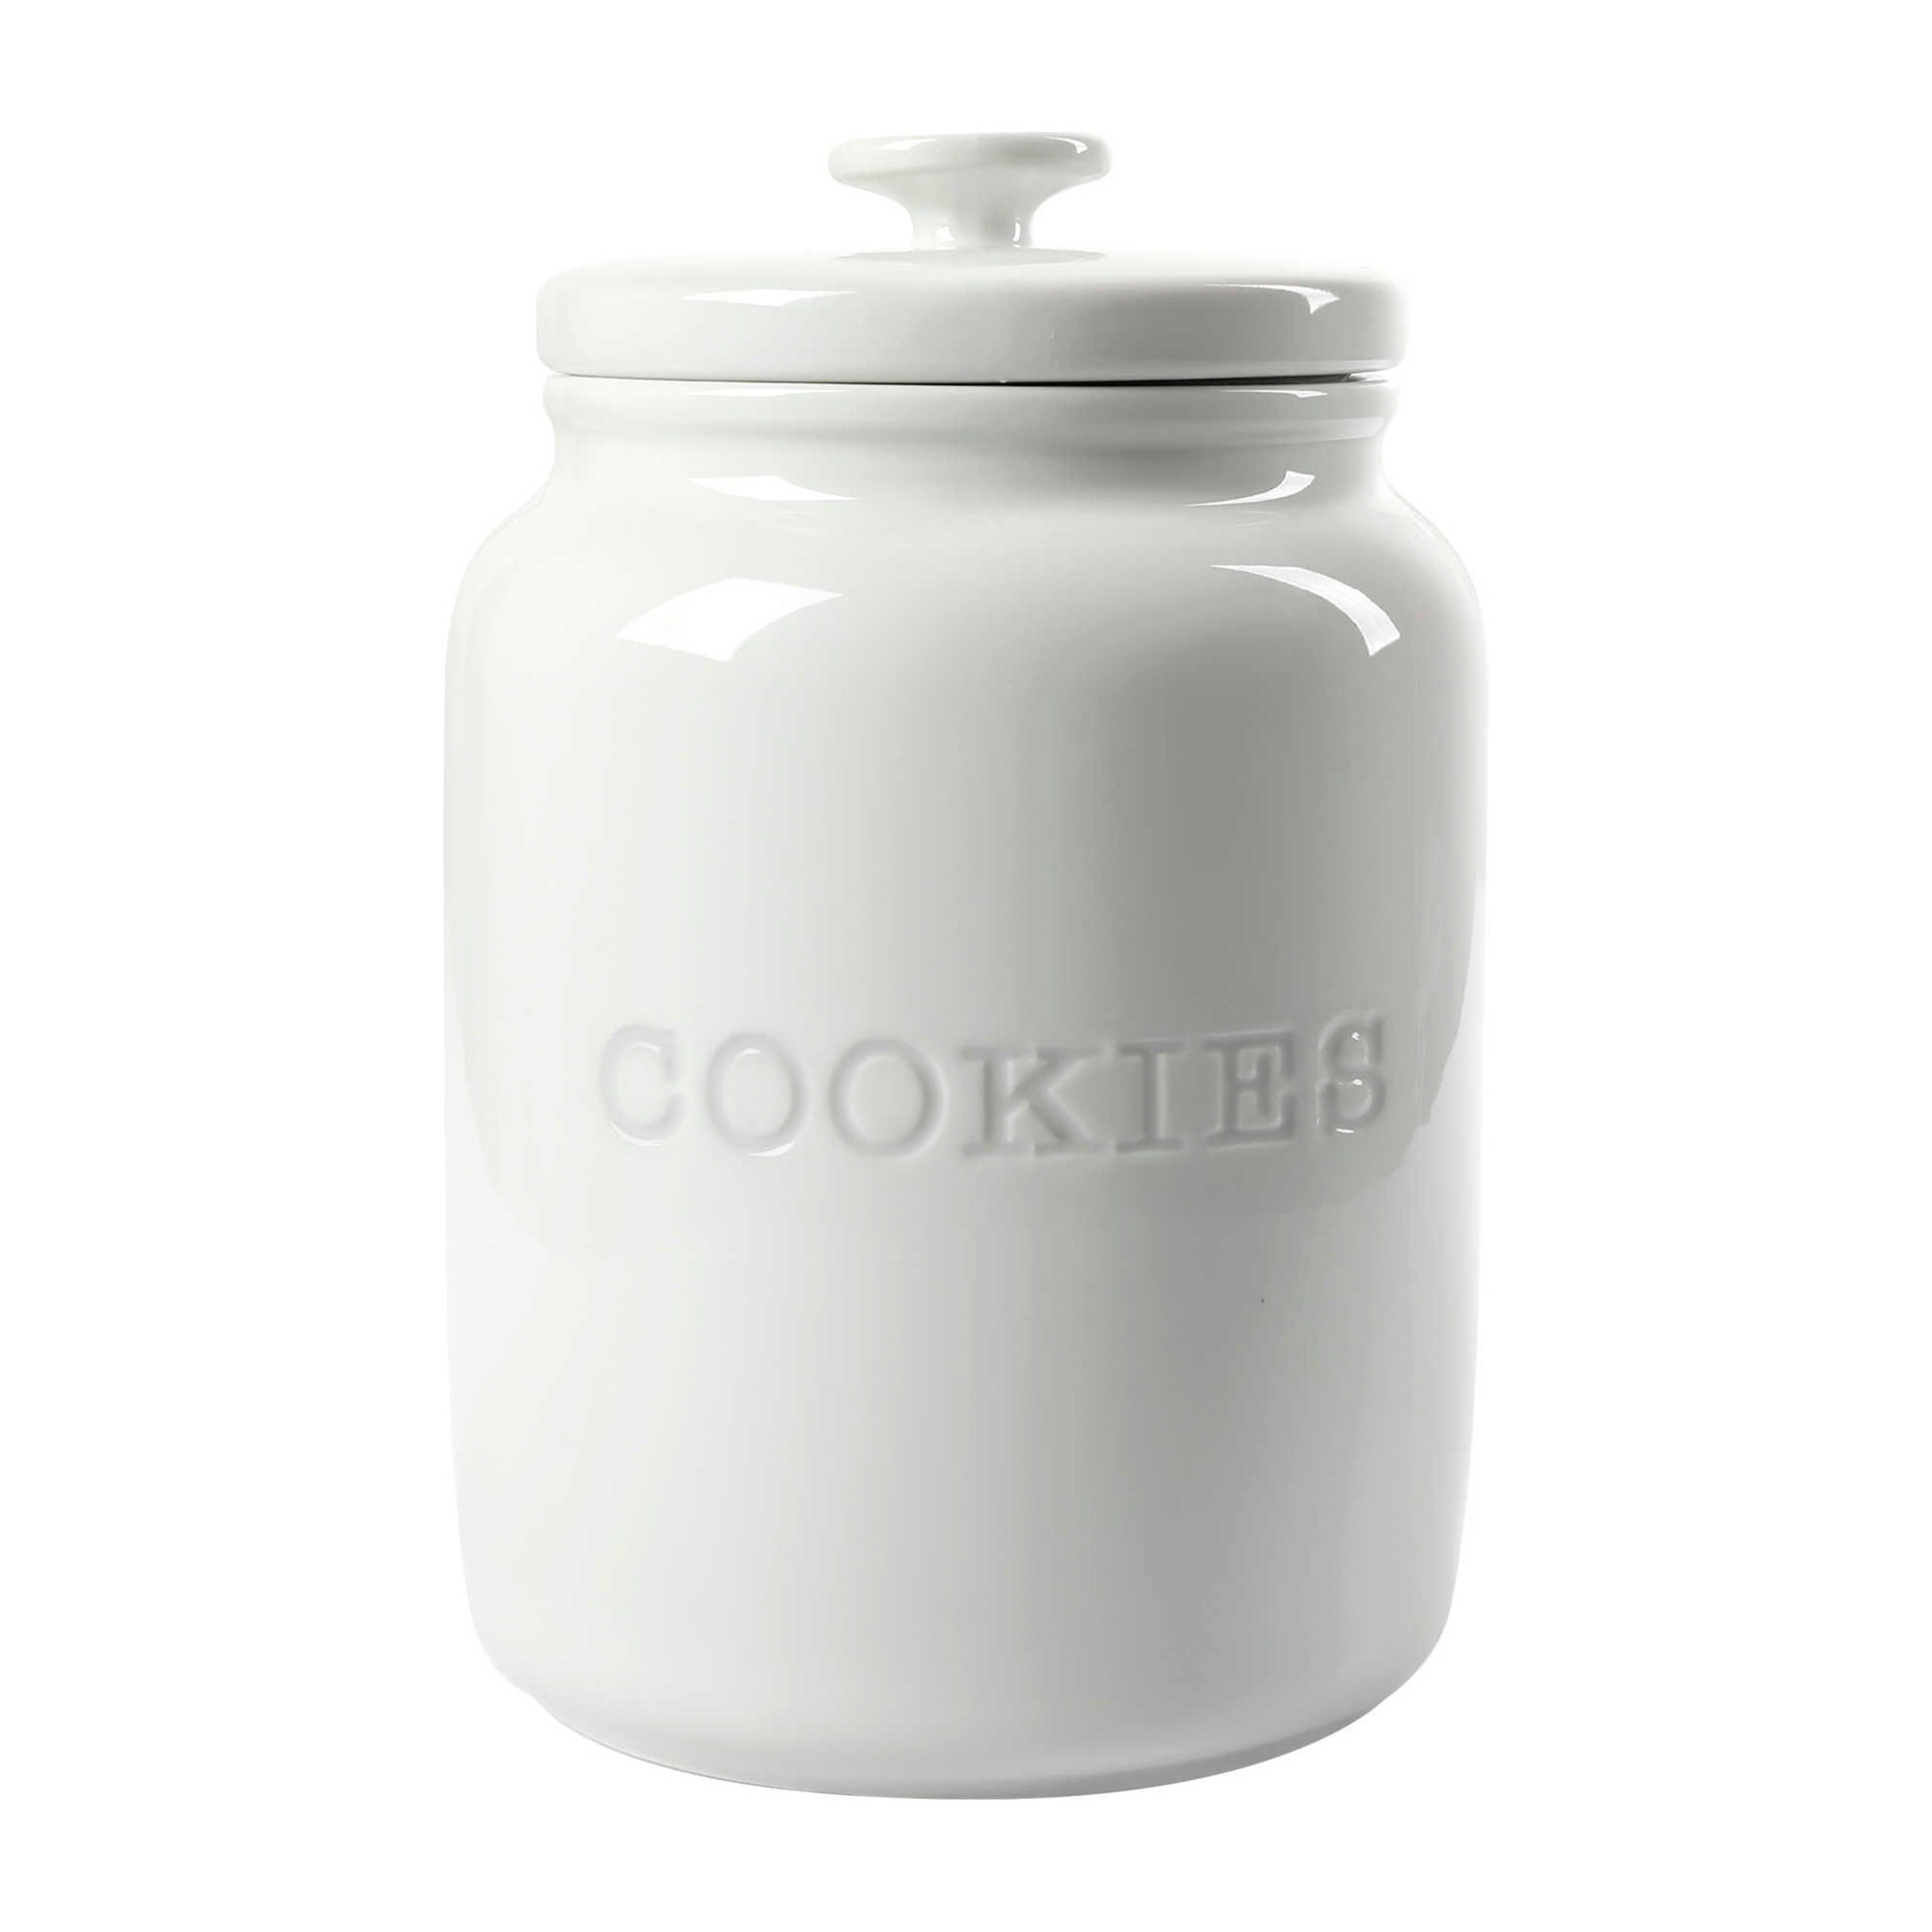 Our Table Simply White 132 oz. Porcelain Word Cookie Jar with Air Tight Lid